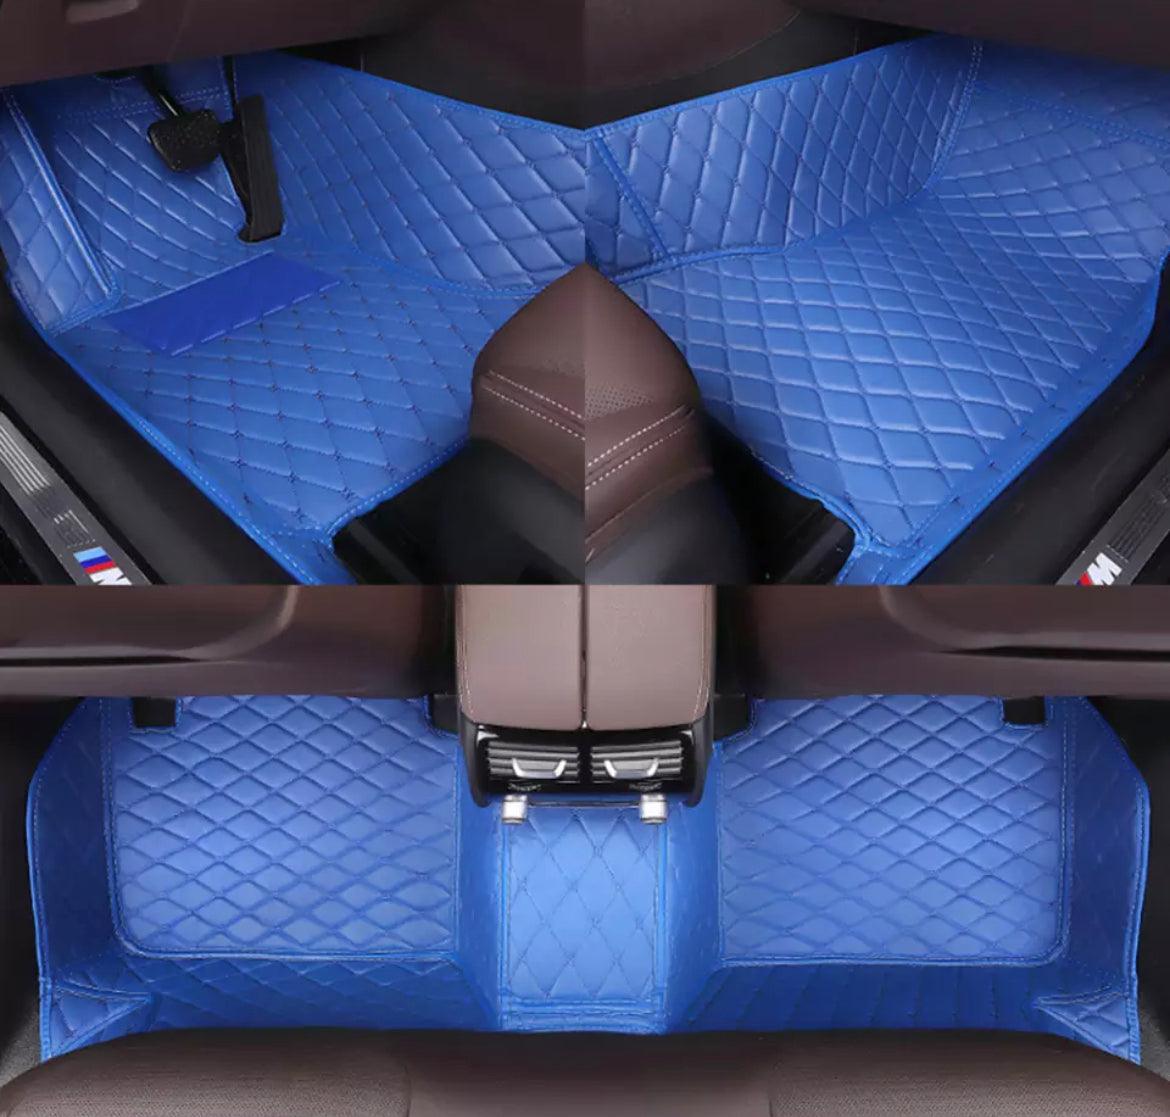 Custom Car Mats - Upgrade Your Car's Interior with Personalized